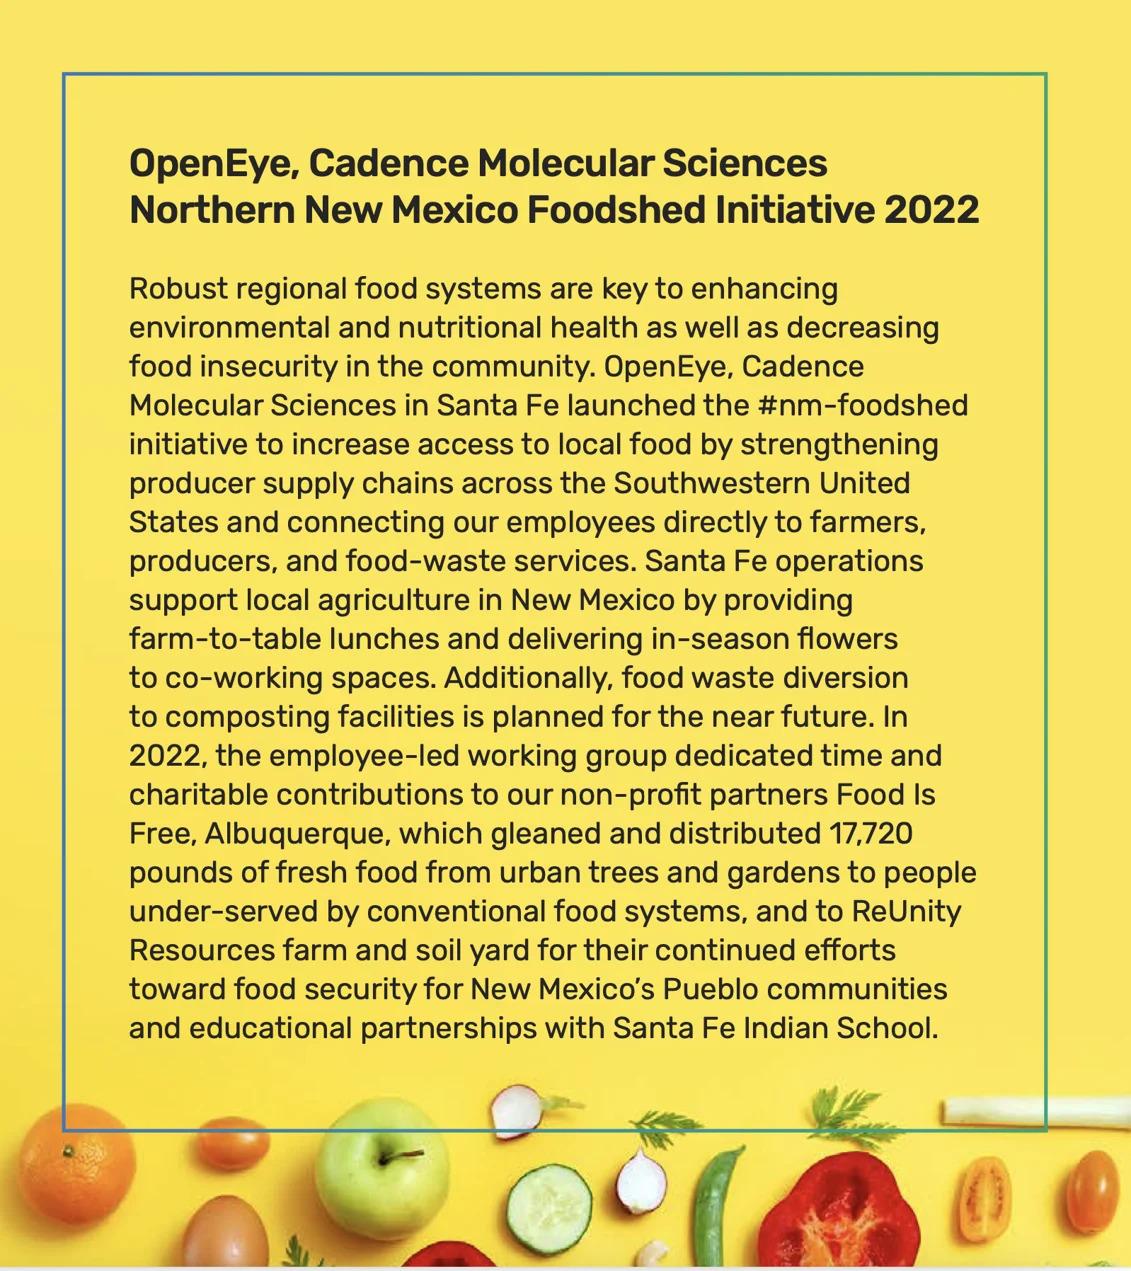 Excerpt "OpenEye, Cadence Molecular Sciences Northern New Mexico Foodshed Initiative 2022."